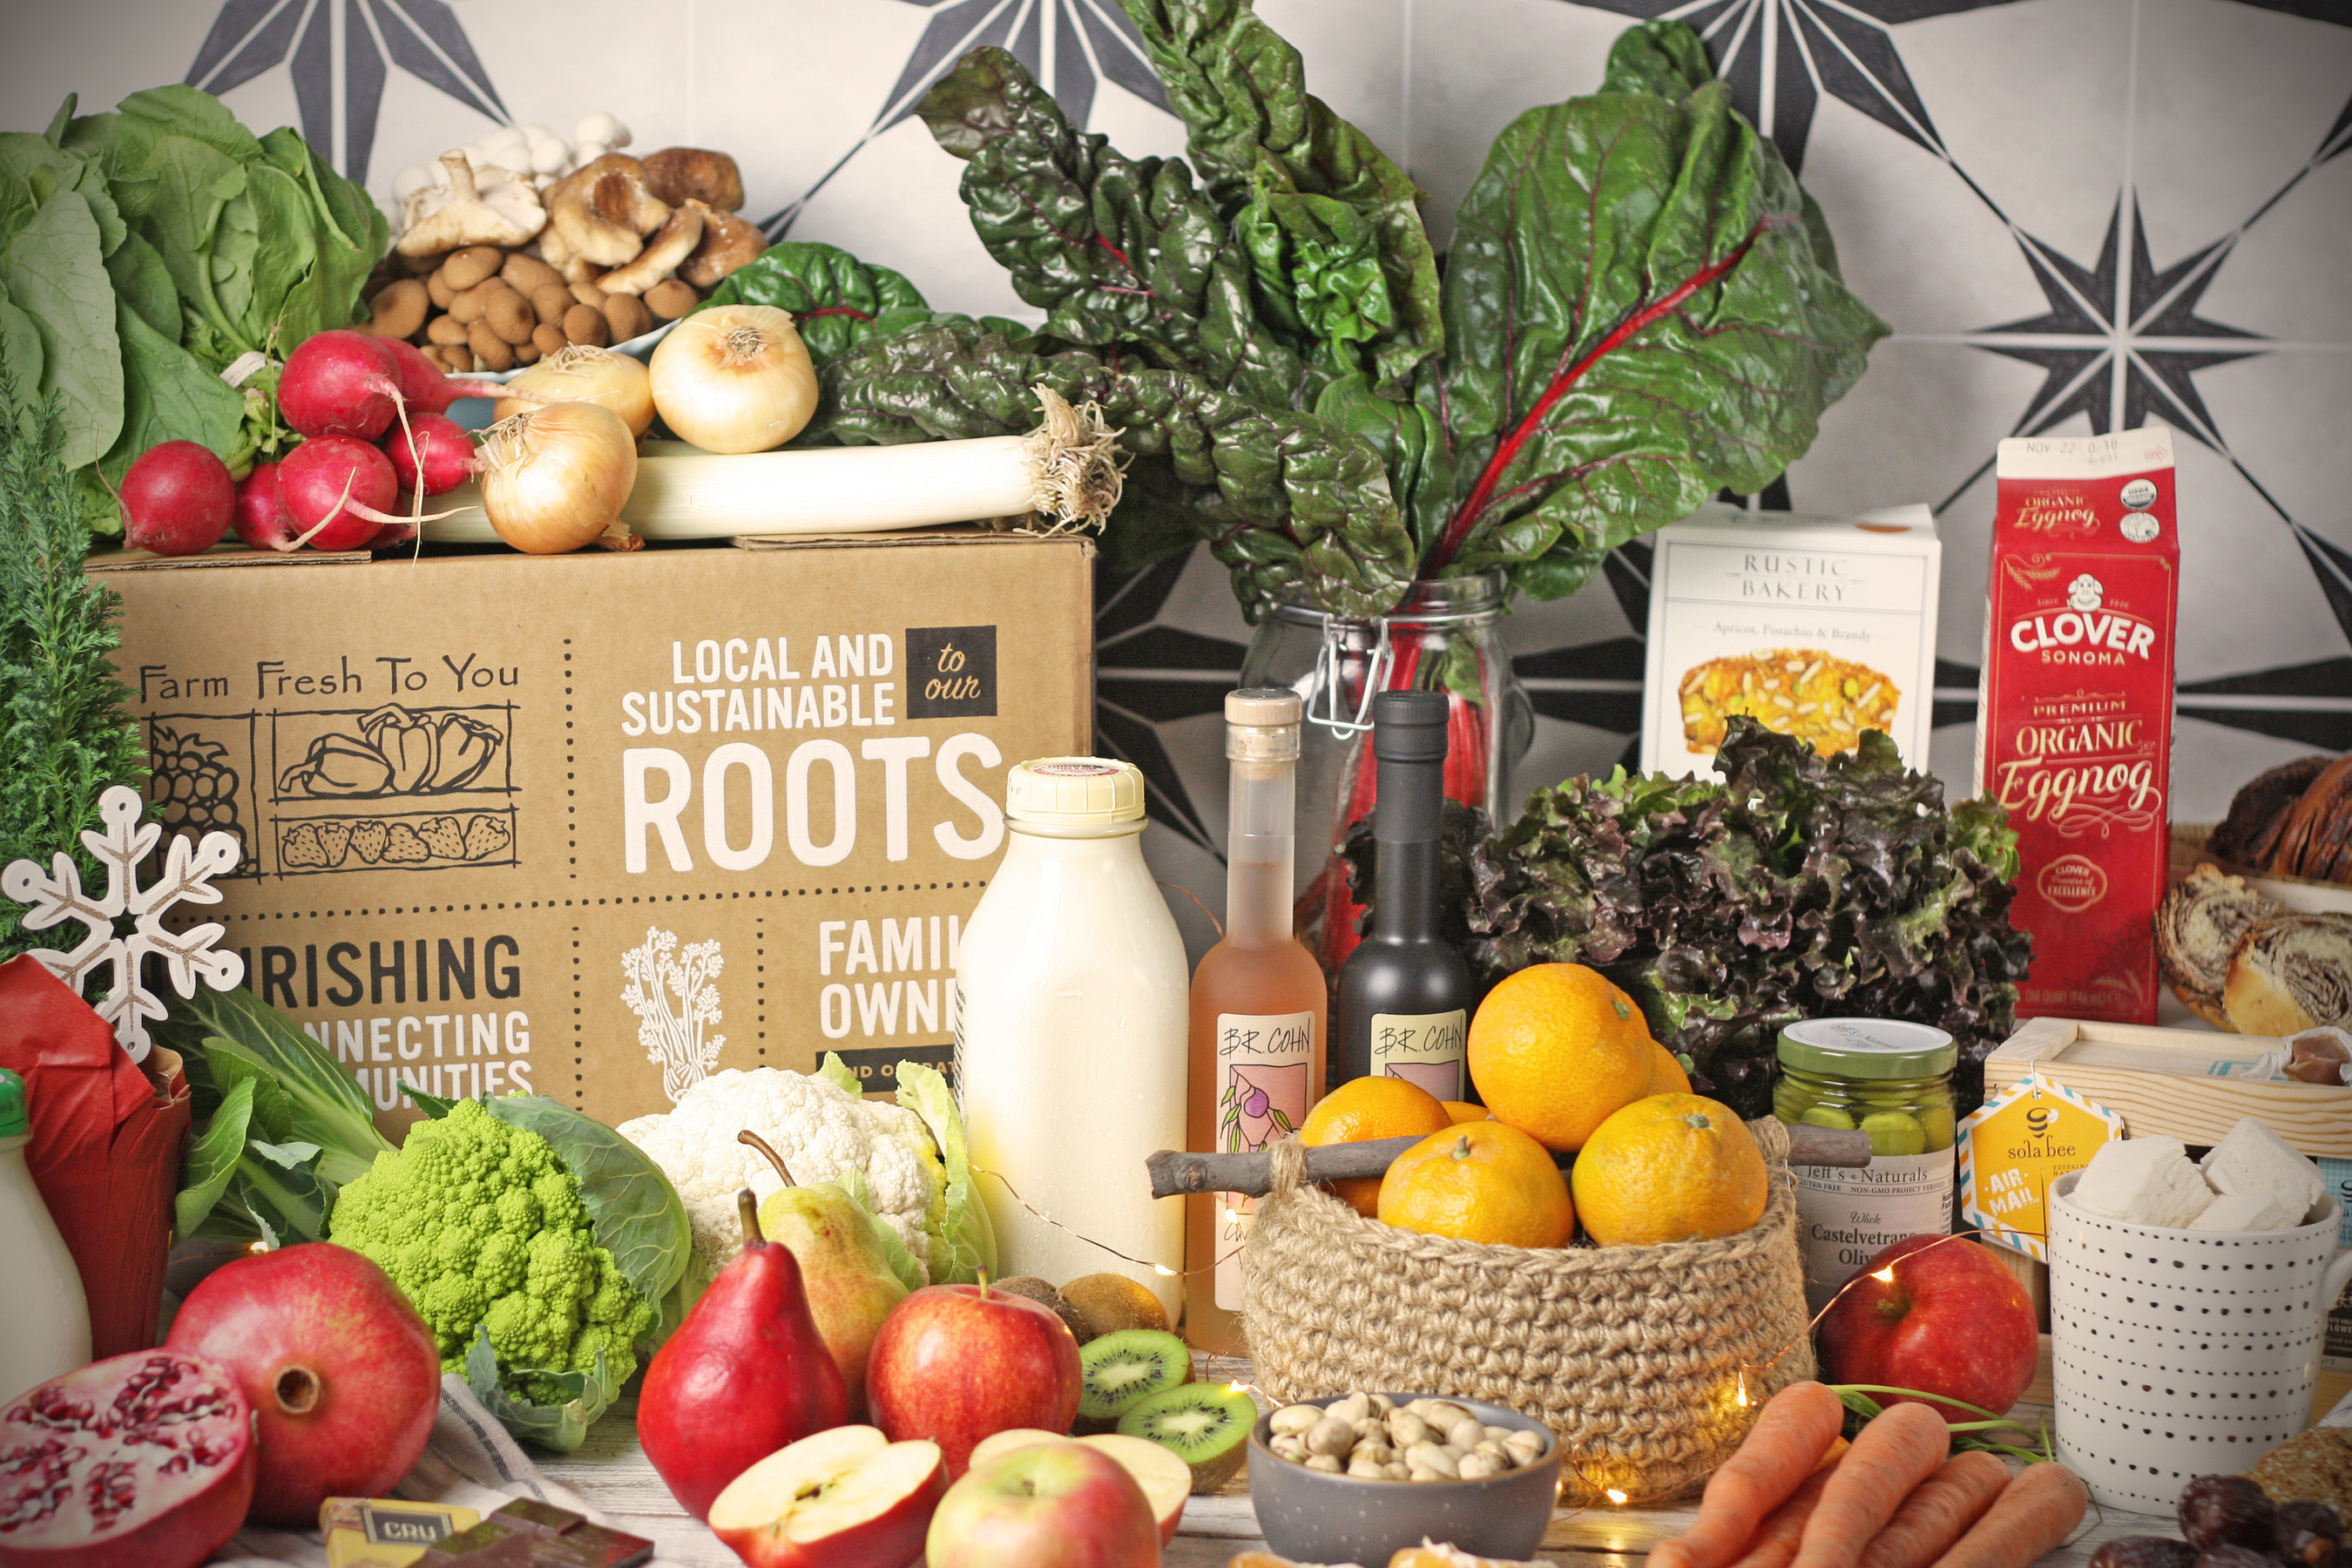 Farm Fresh To You Launches Holiday Gift Line Featuring Products From Small Farms And Purveyors